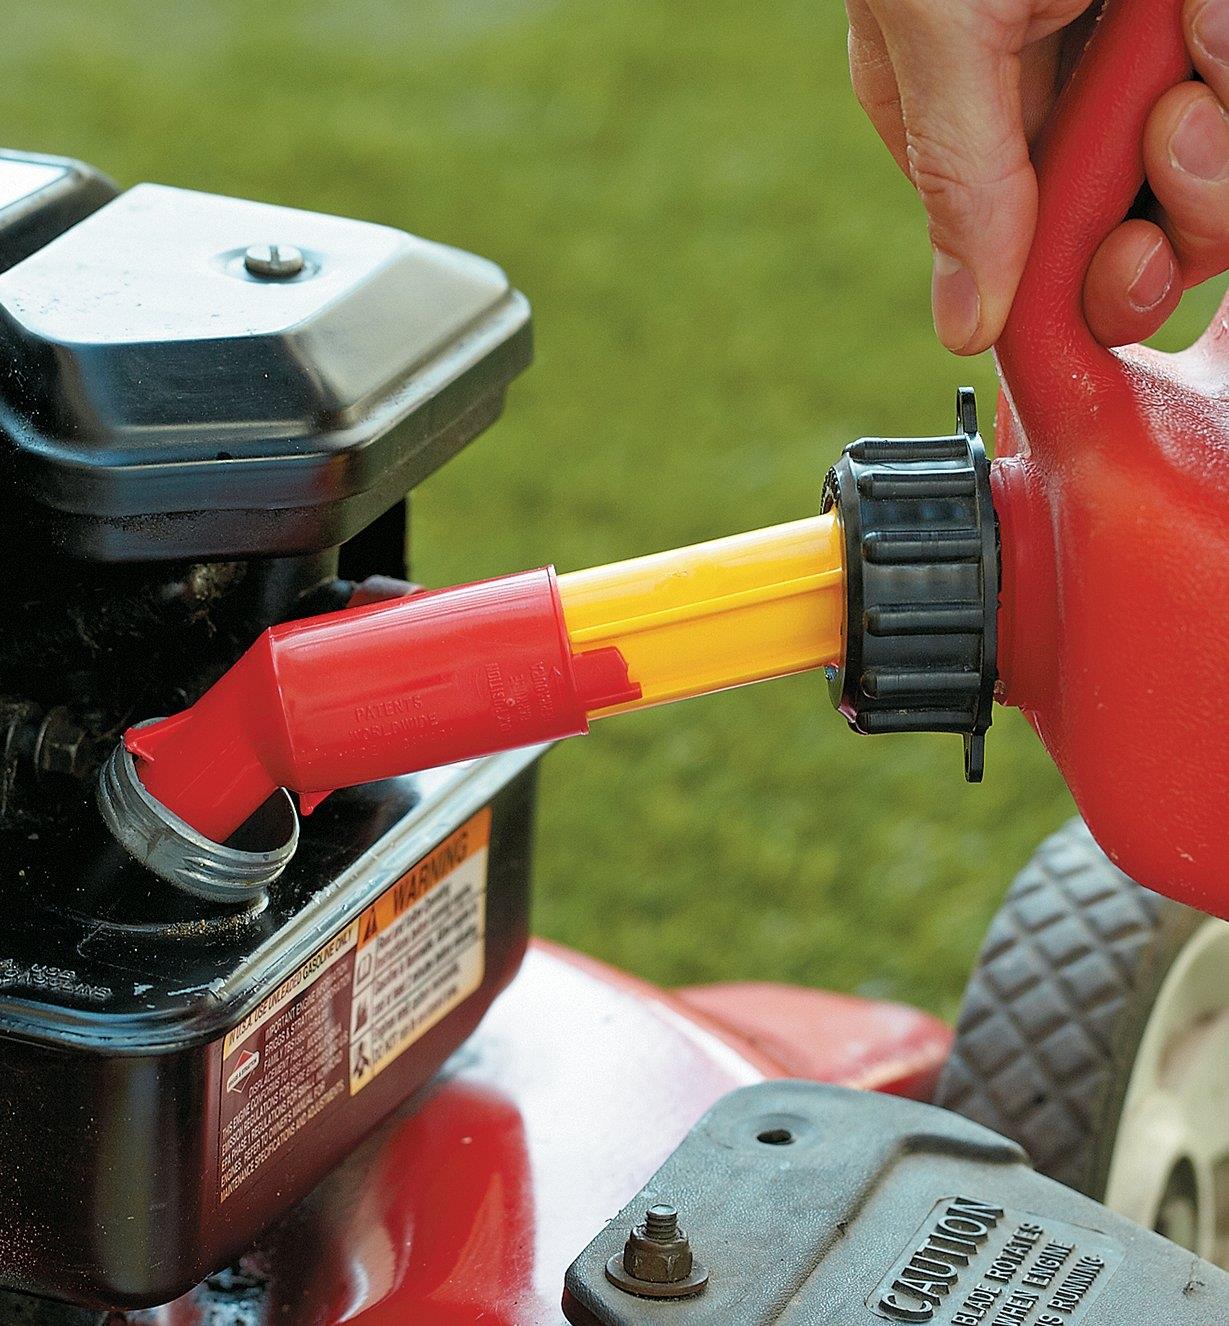 Filling a lawnmower from a fuel container using the auto shut-off spout